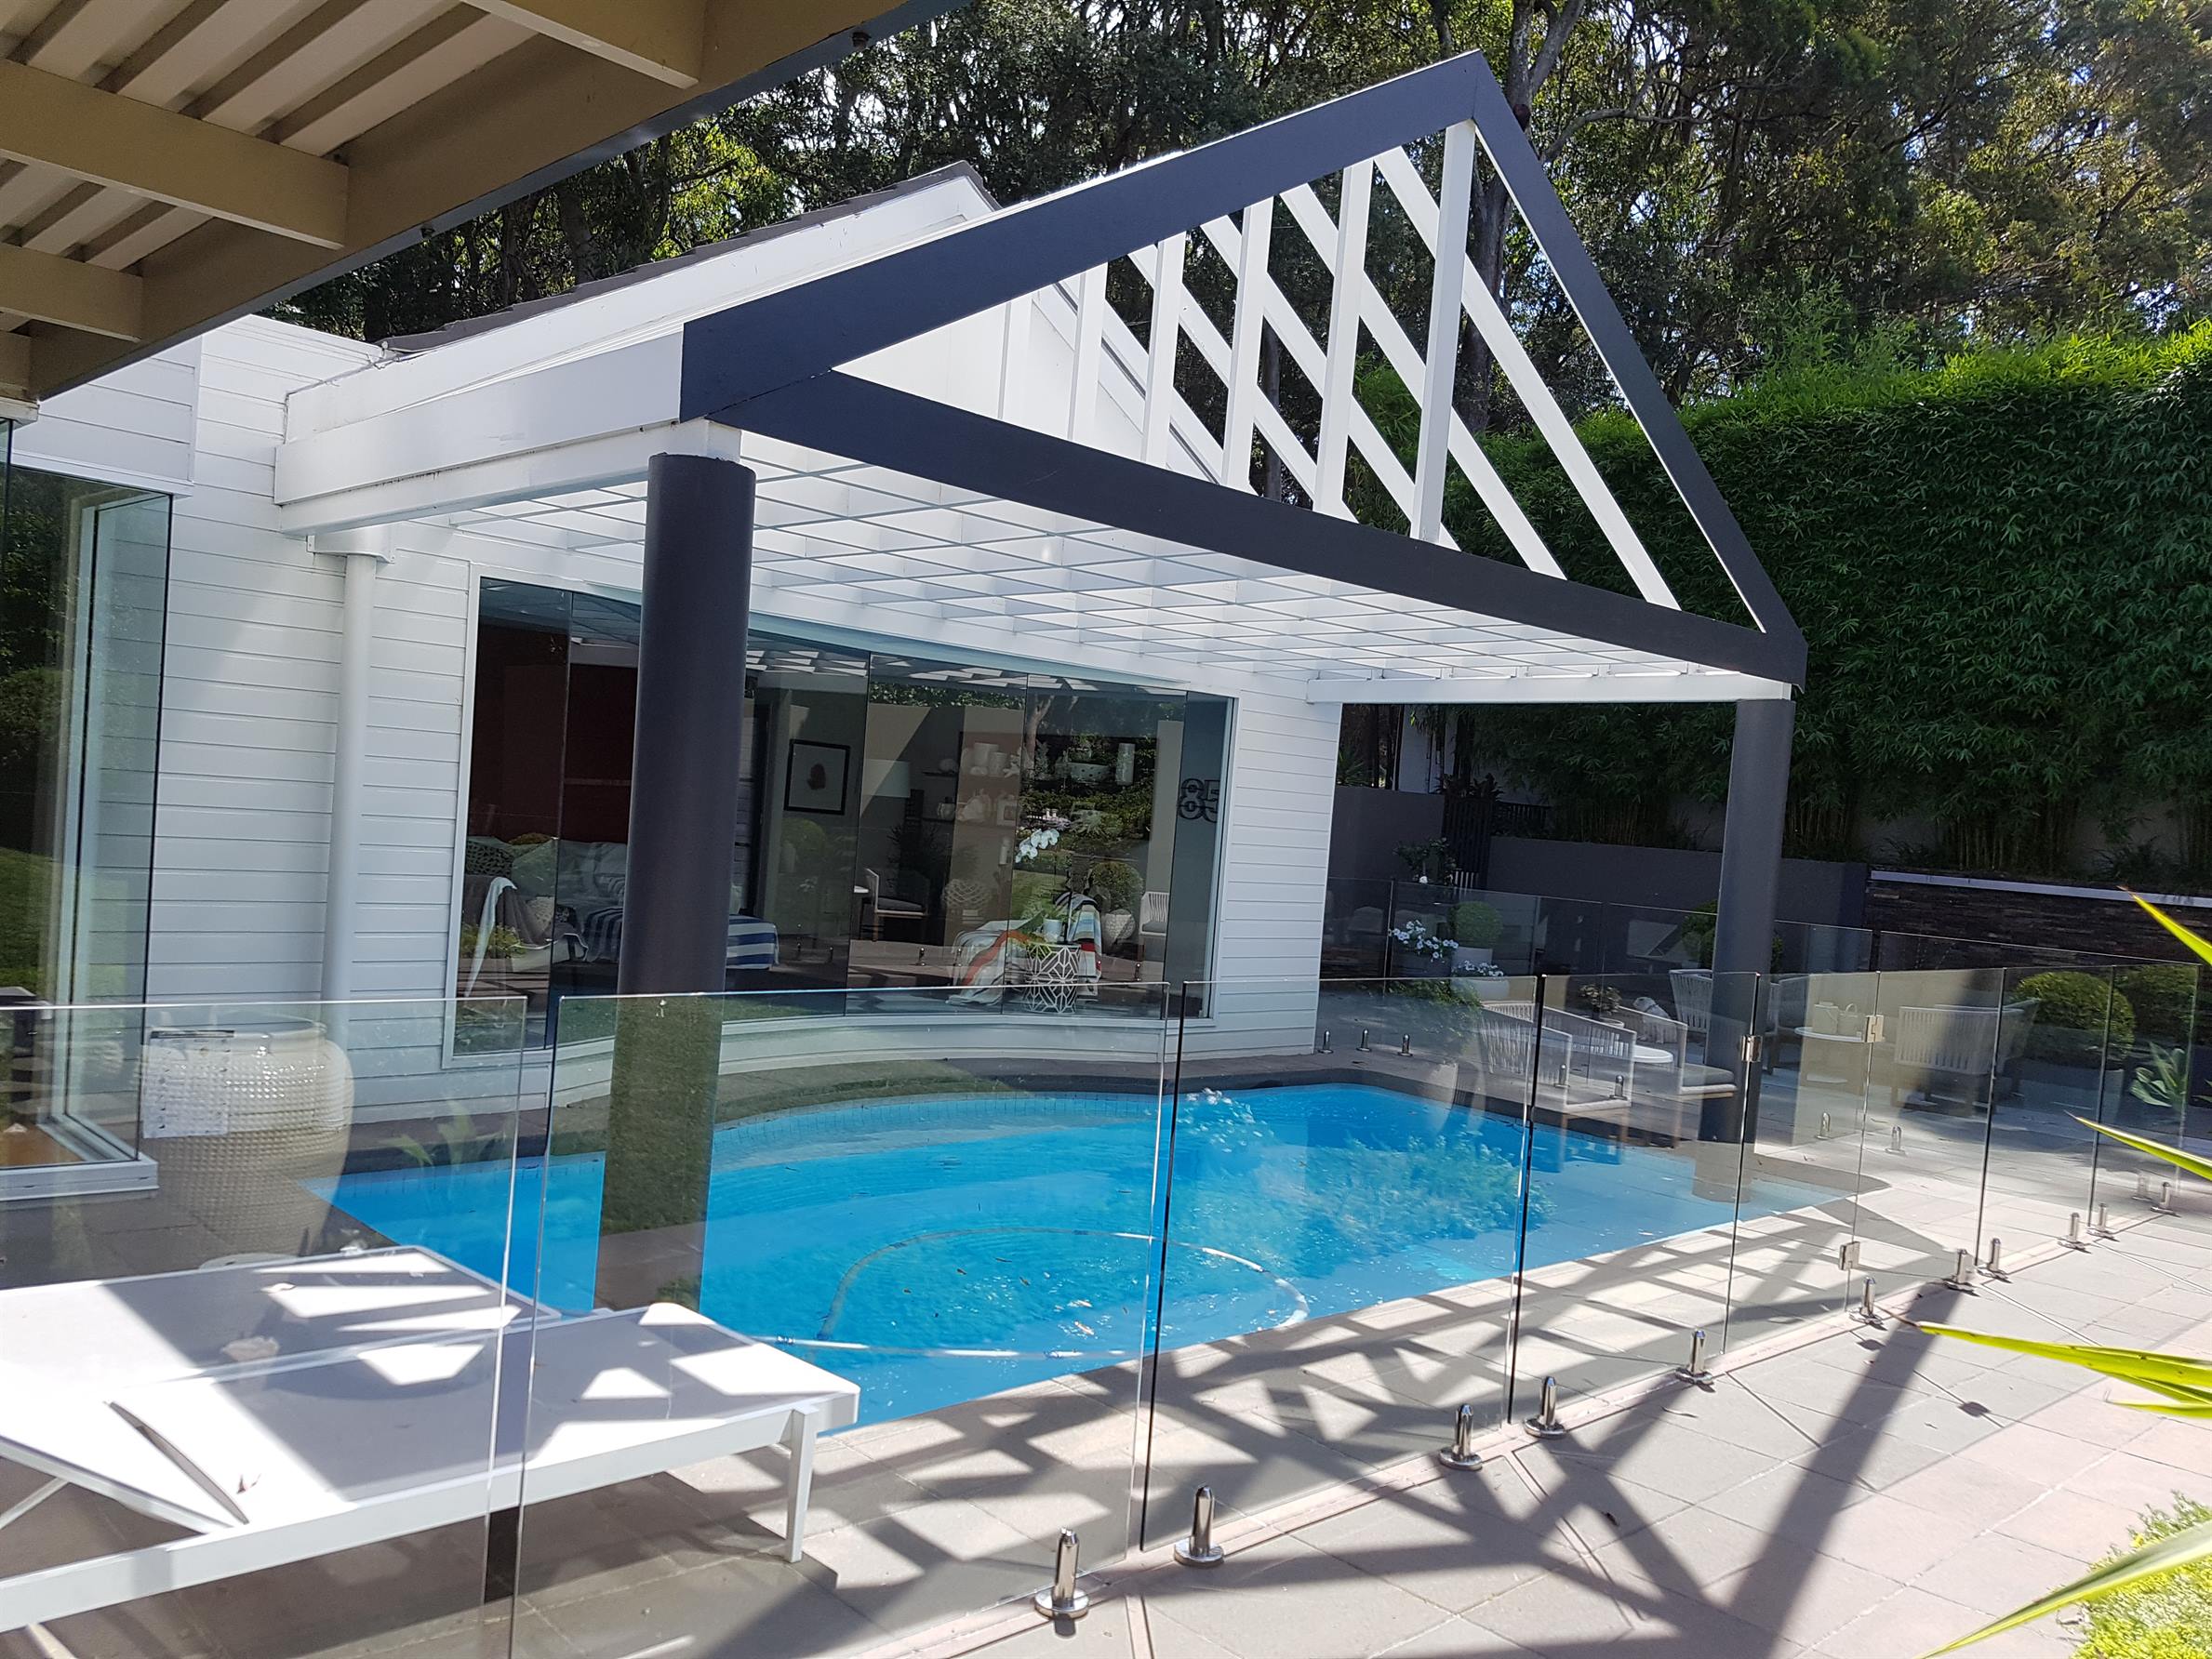 7 Tips For Homeowners To Improve Their Property With Glass Pool Fencing & Balustrades